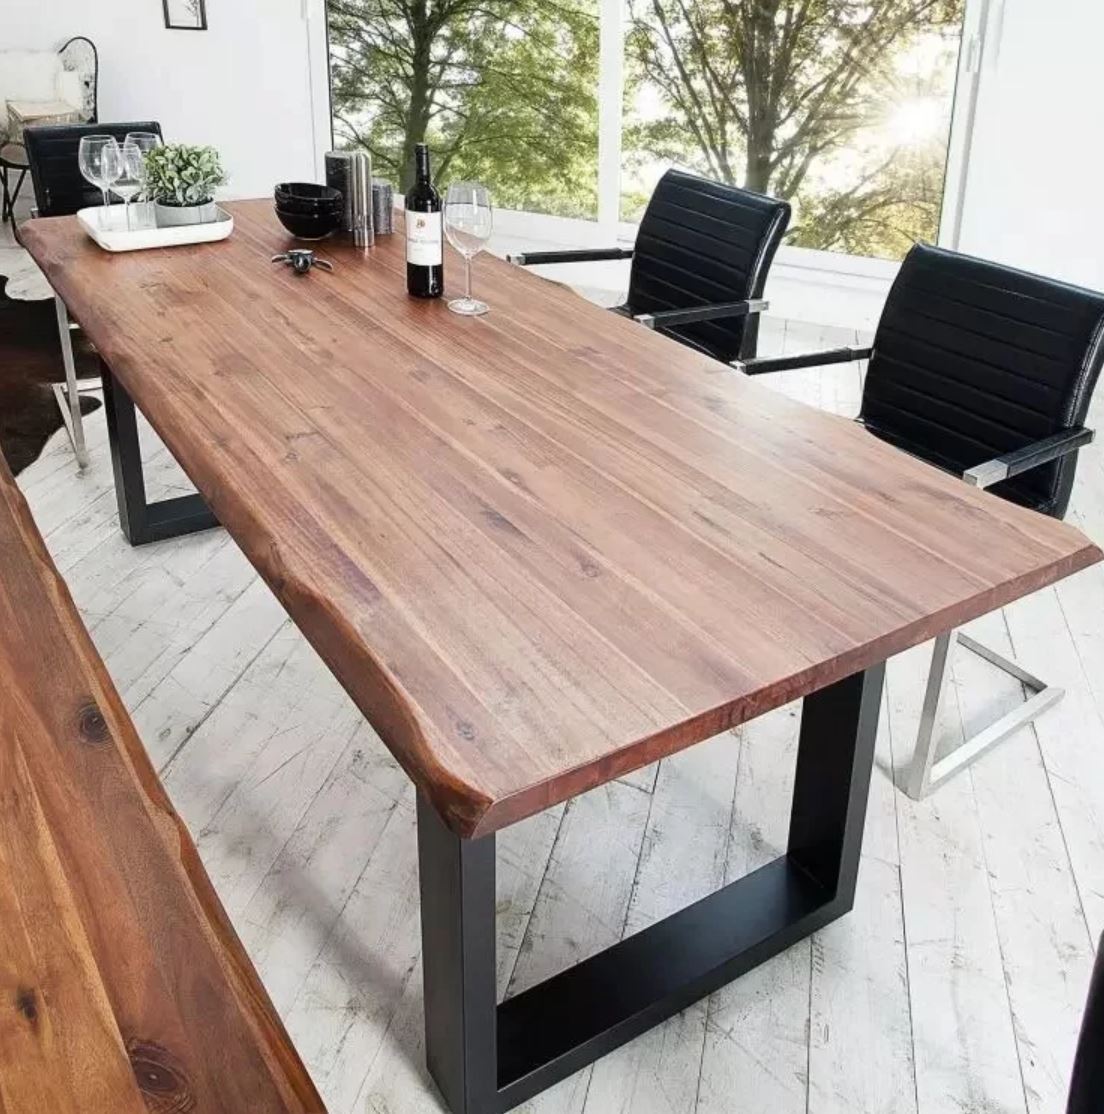 WAREHOUSE SALE AUBREY Modern Industrial Solid Wood Dining Table ( 4 Color Selection ) Special Price 499 - 799